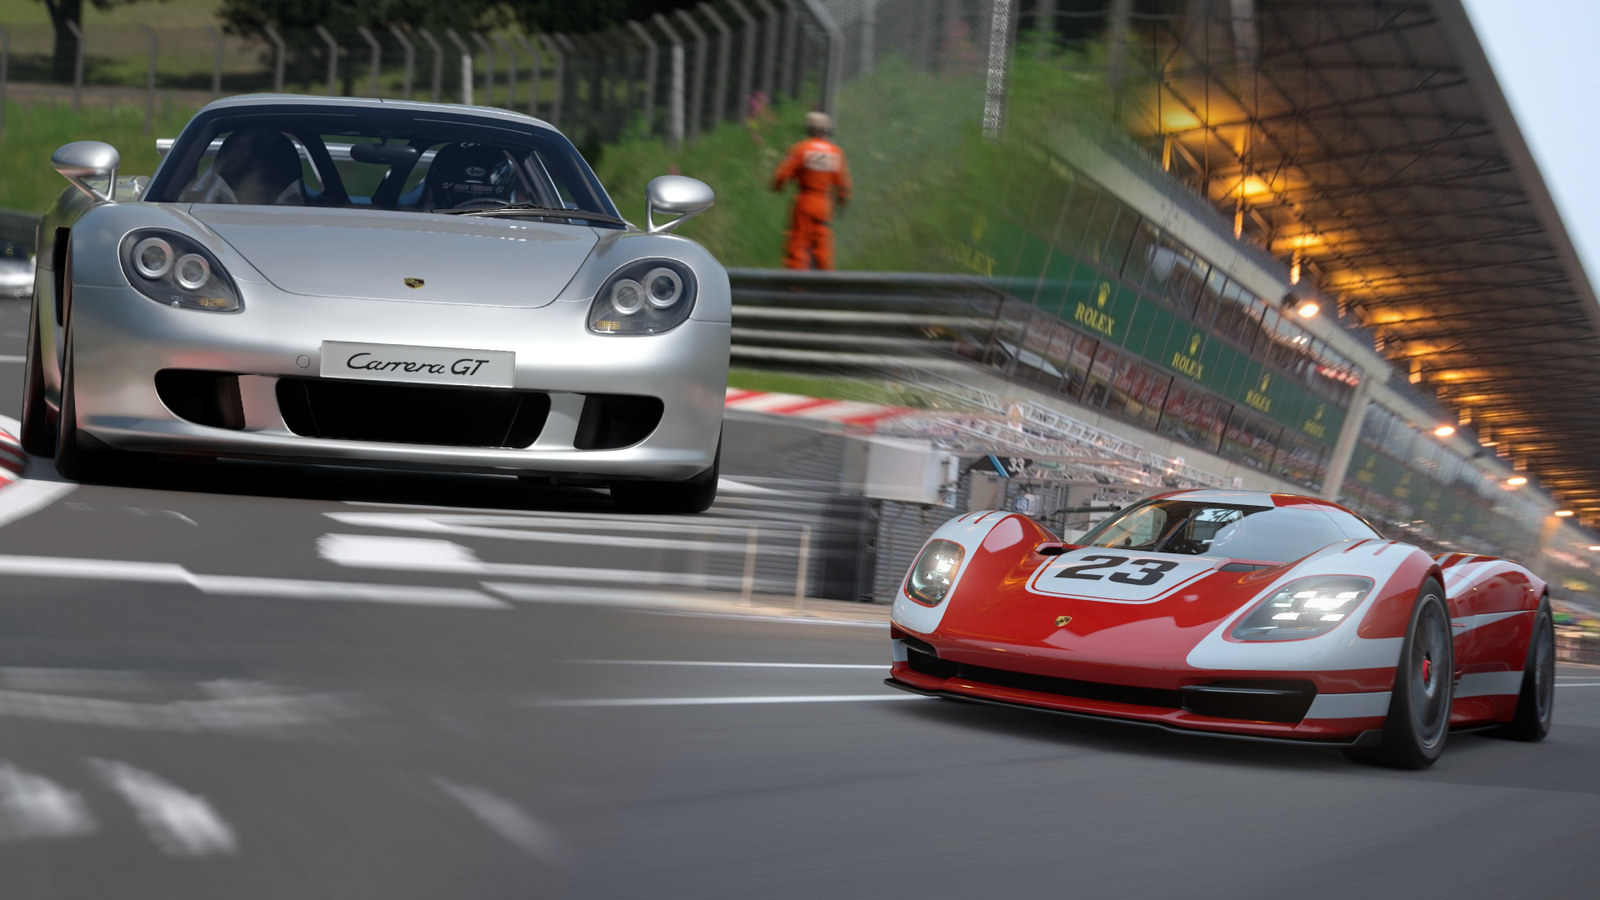 Gran Turismo 7 Must Be Played Online For Virtually All Content